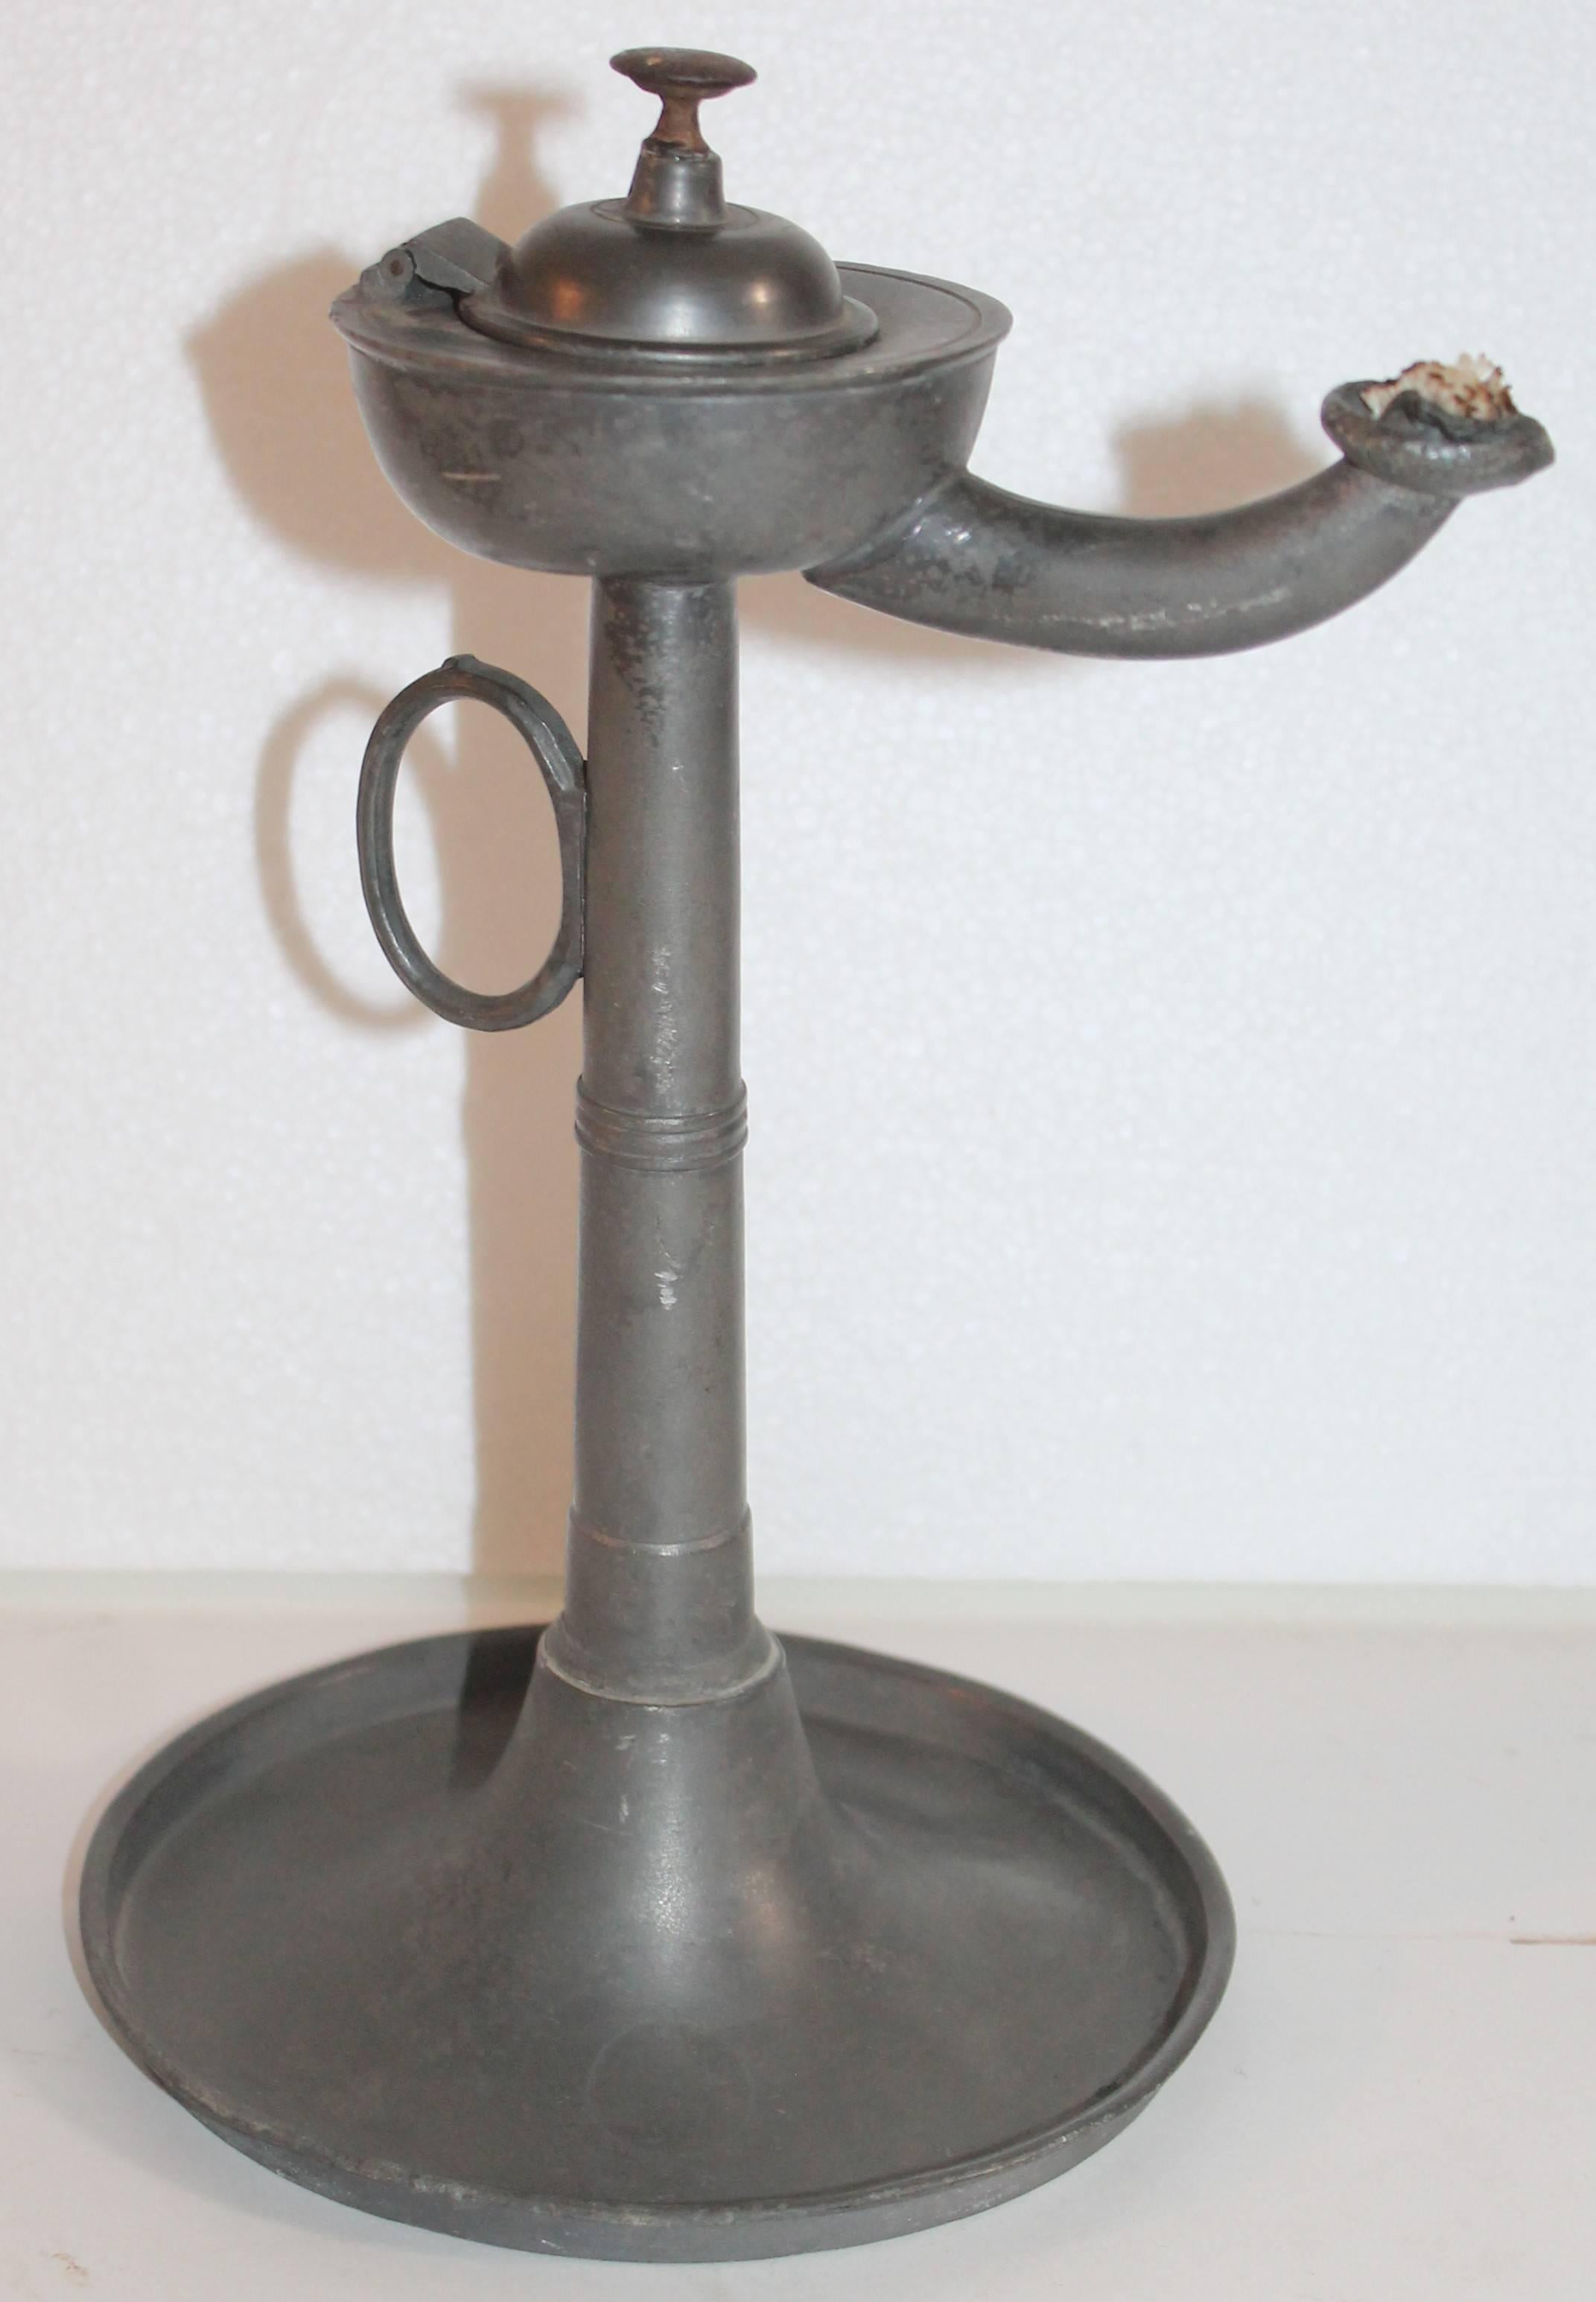 This fine pewter Betty or oil lamp is in fine condition. This oil lamp is quite unusual and has a iron pull on lid.